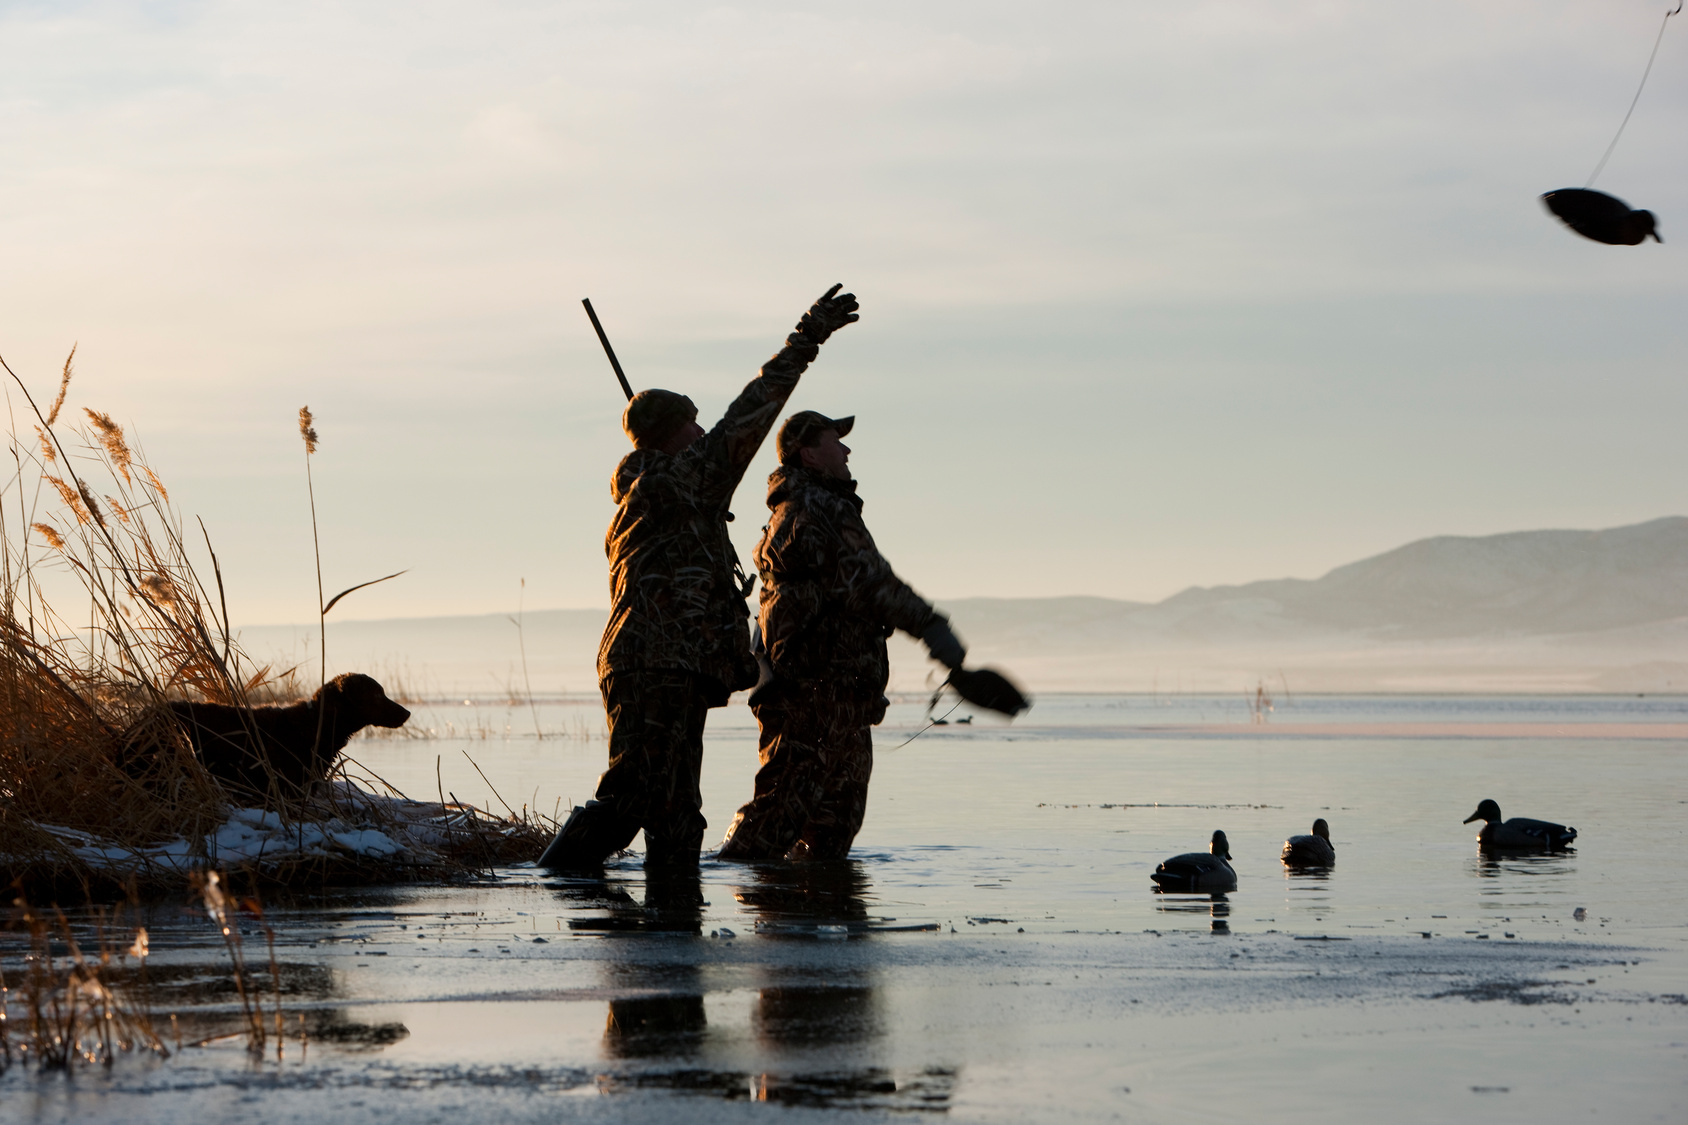 What Happens to Duck Hunting When the Great Salt Lake Dries Up?